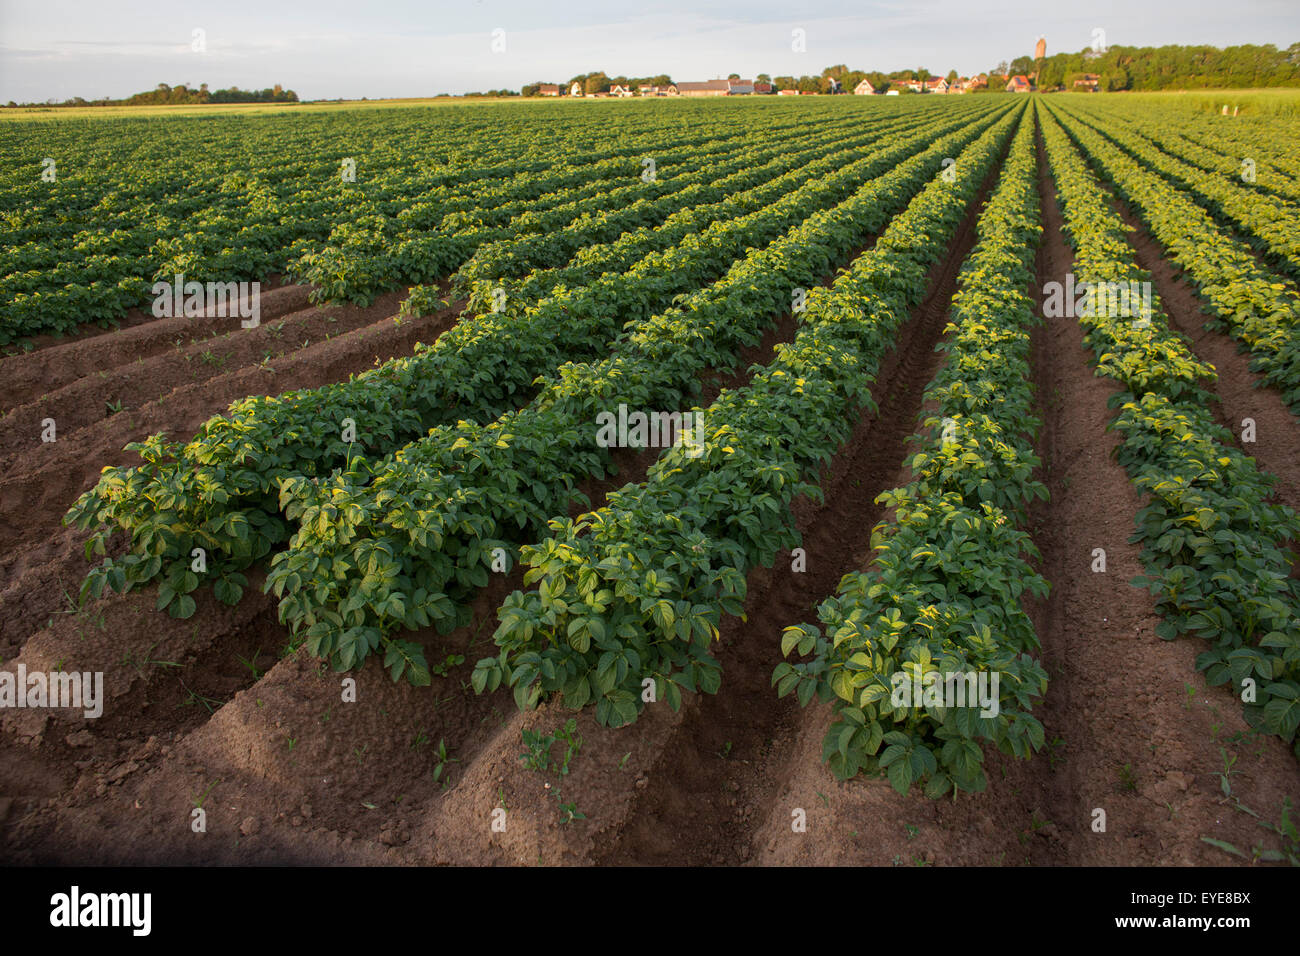 potato production in the netherlands Stock Photo